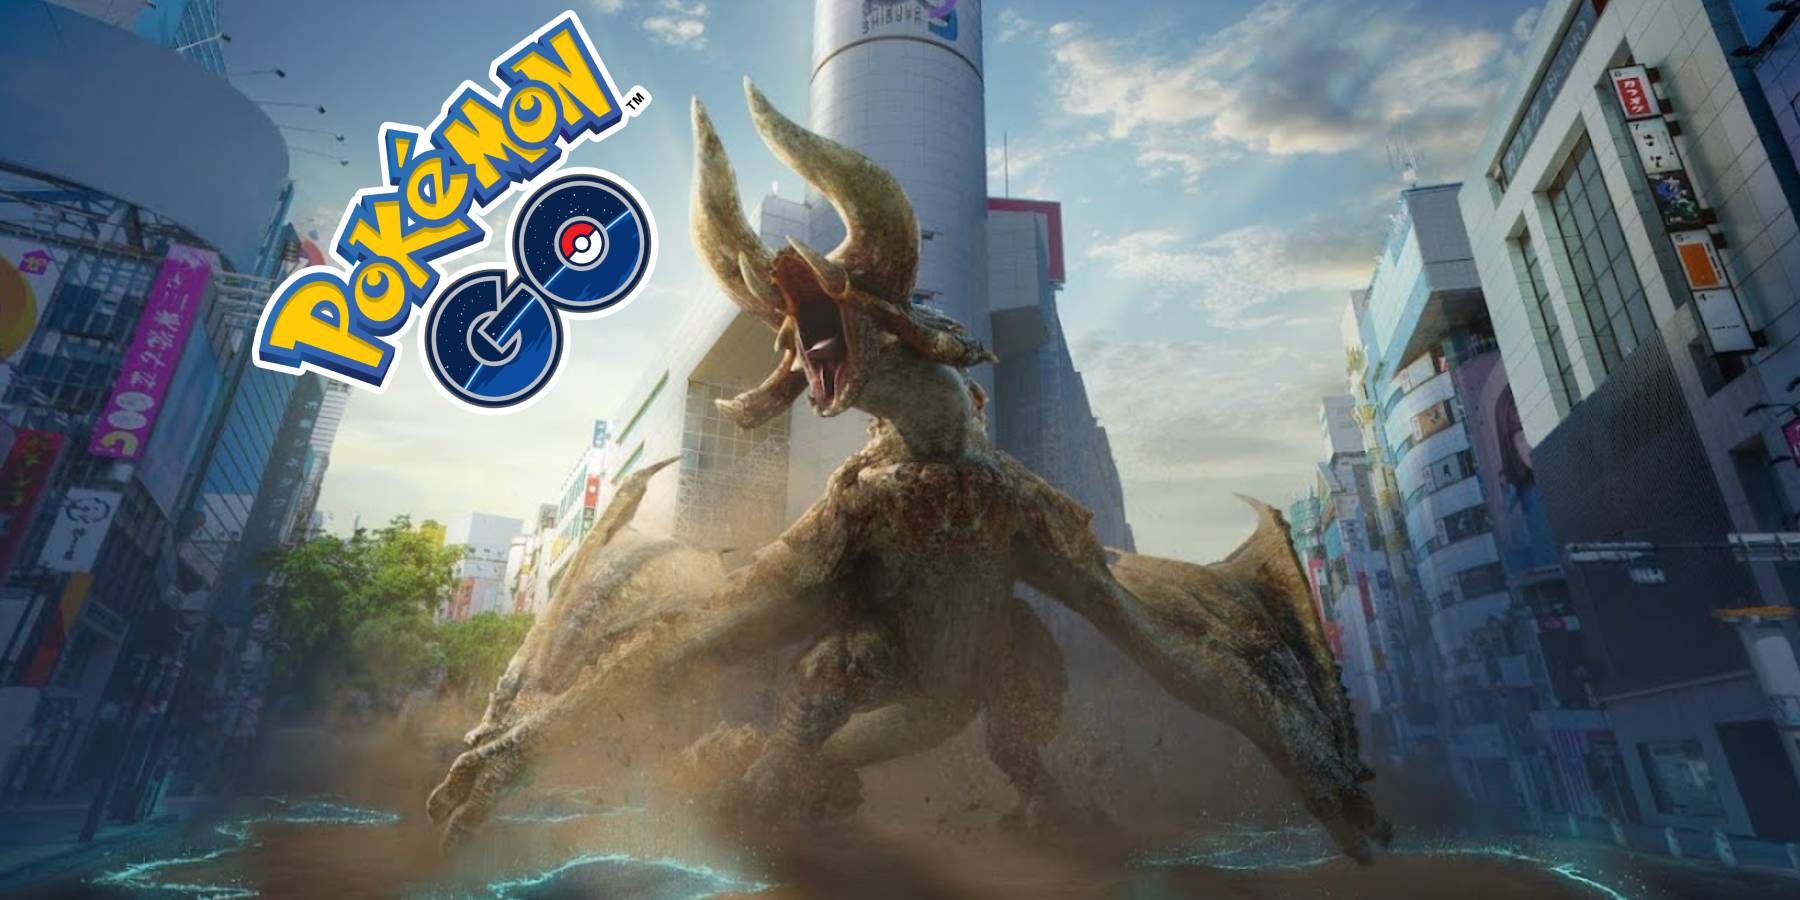 A Diablos from Monster hunter Now tossing Pokemon GO's logo to the side